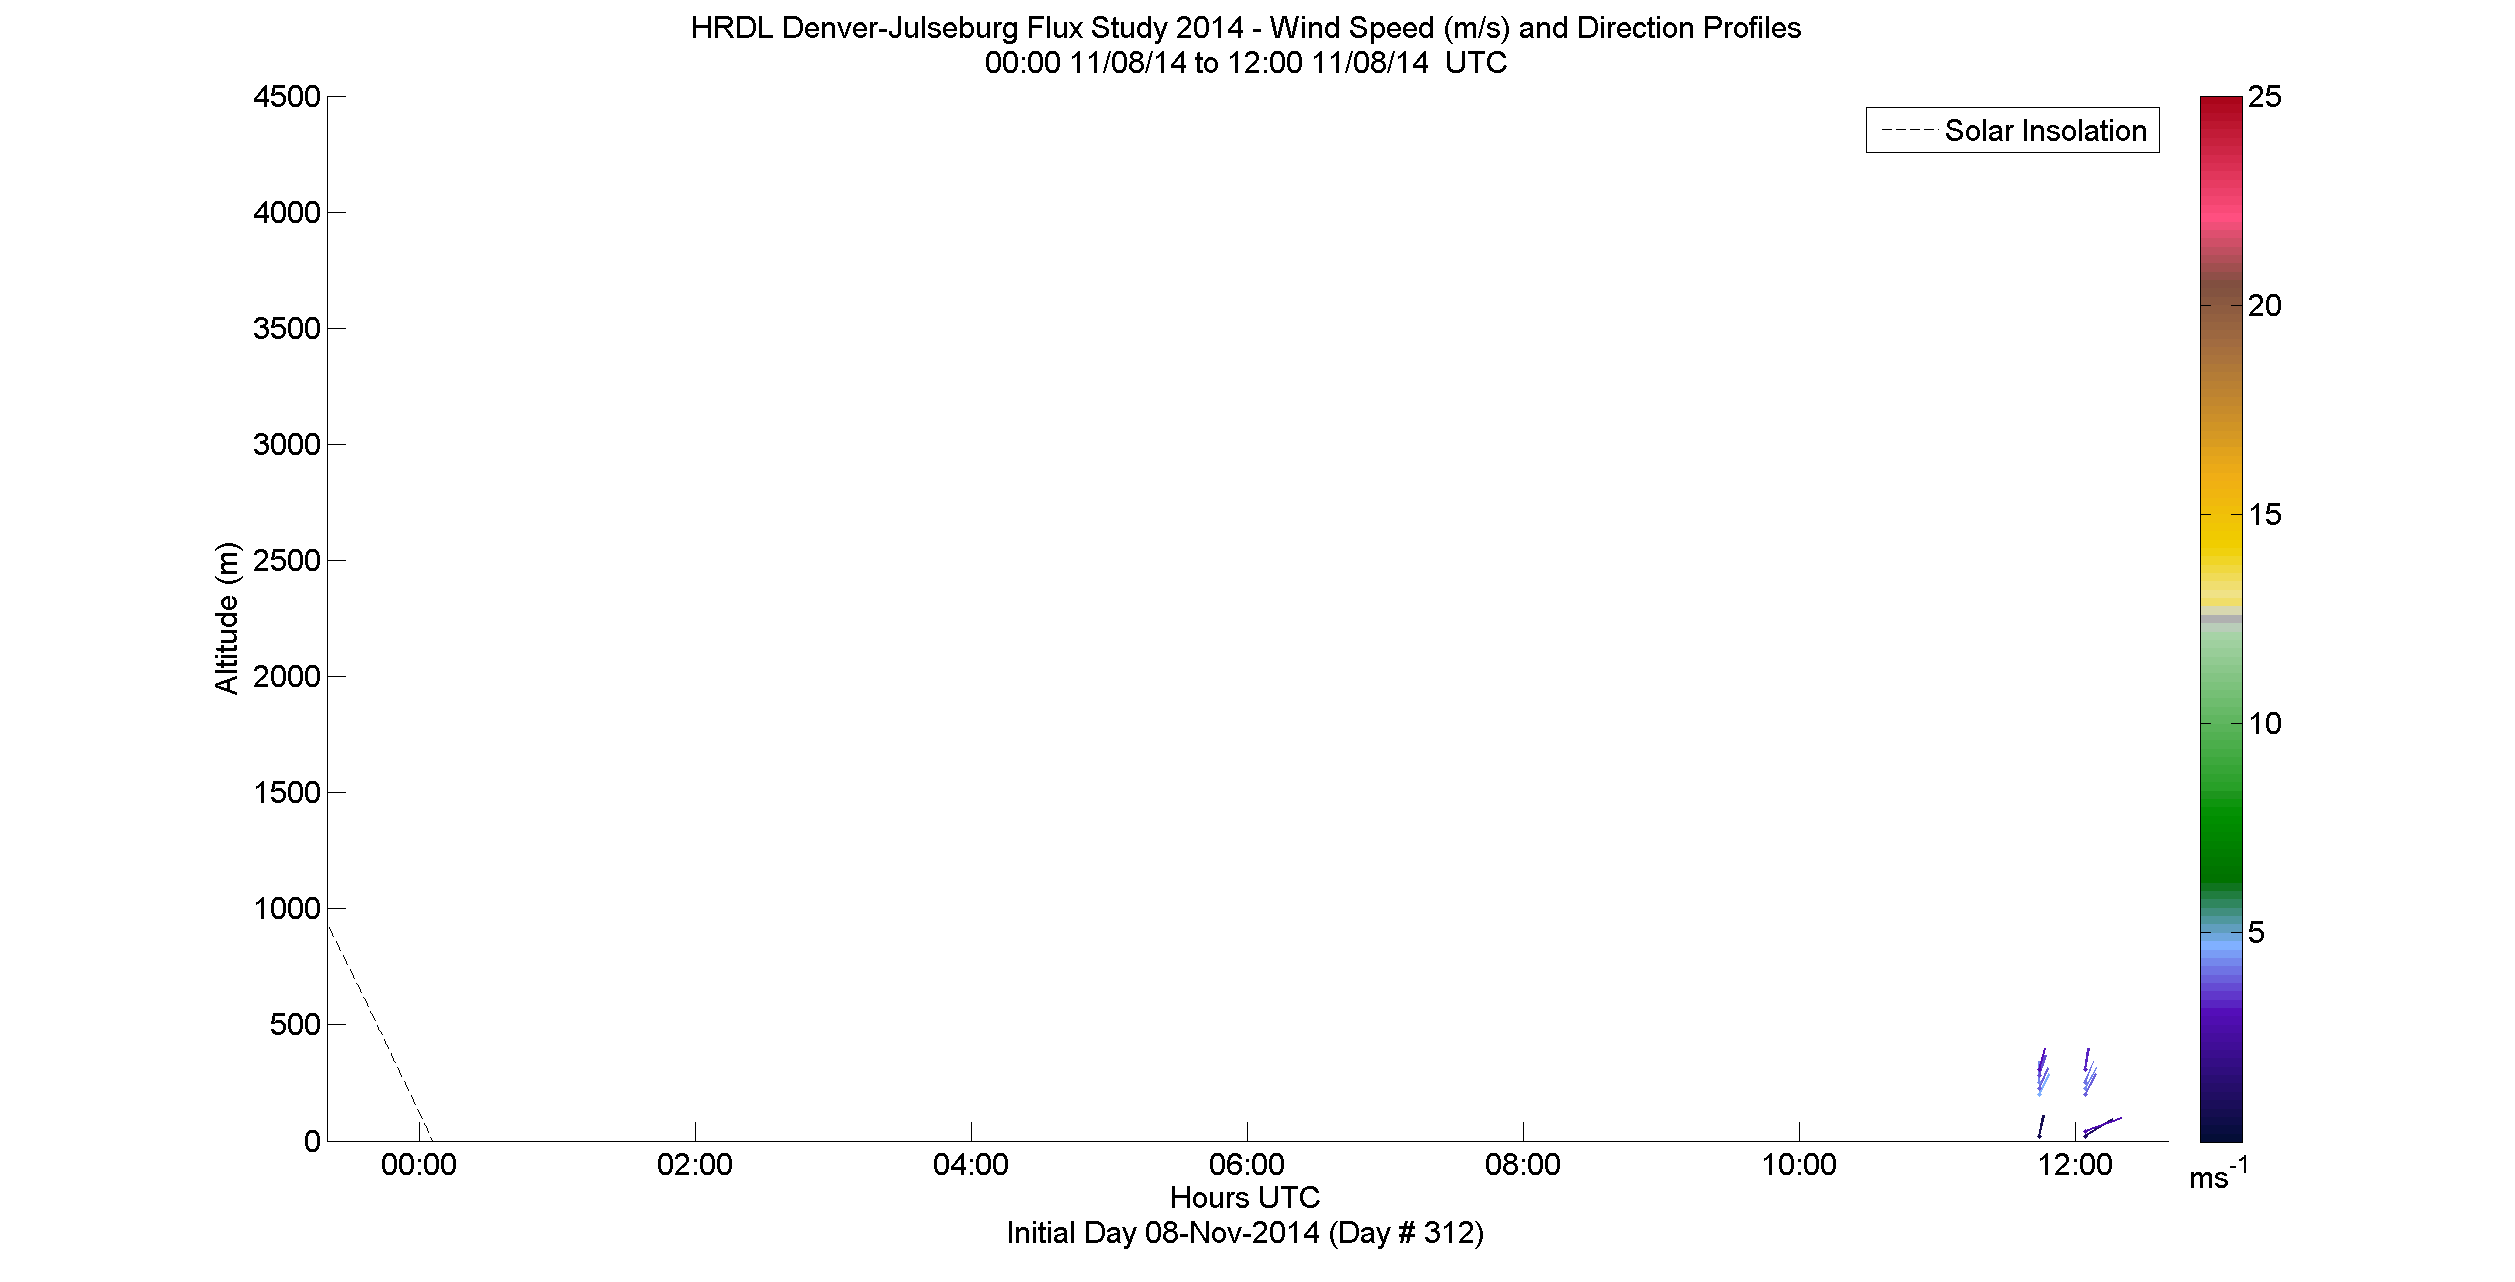 HRDL speed and direction profile - November 8 am